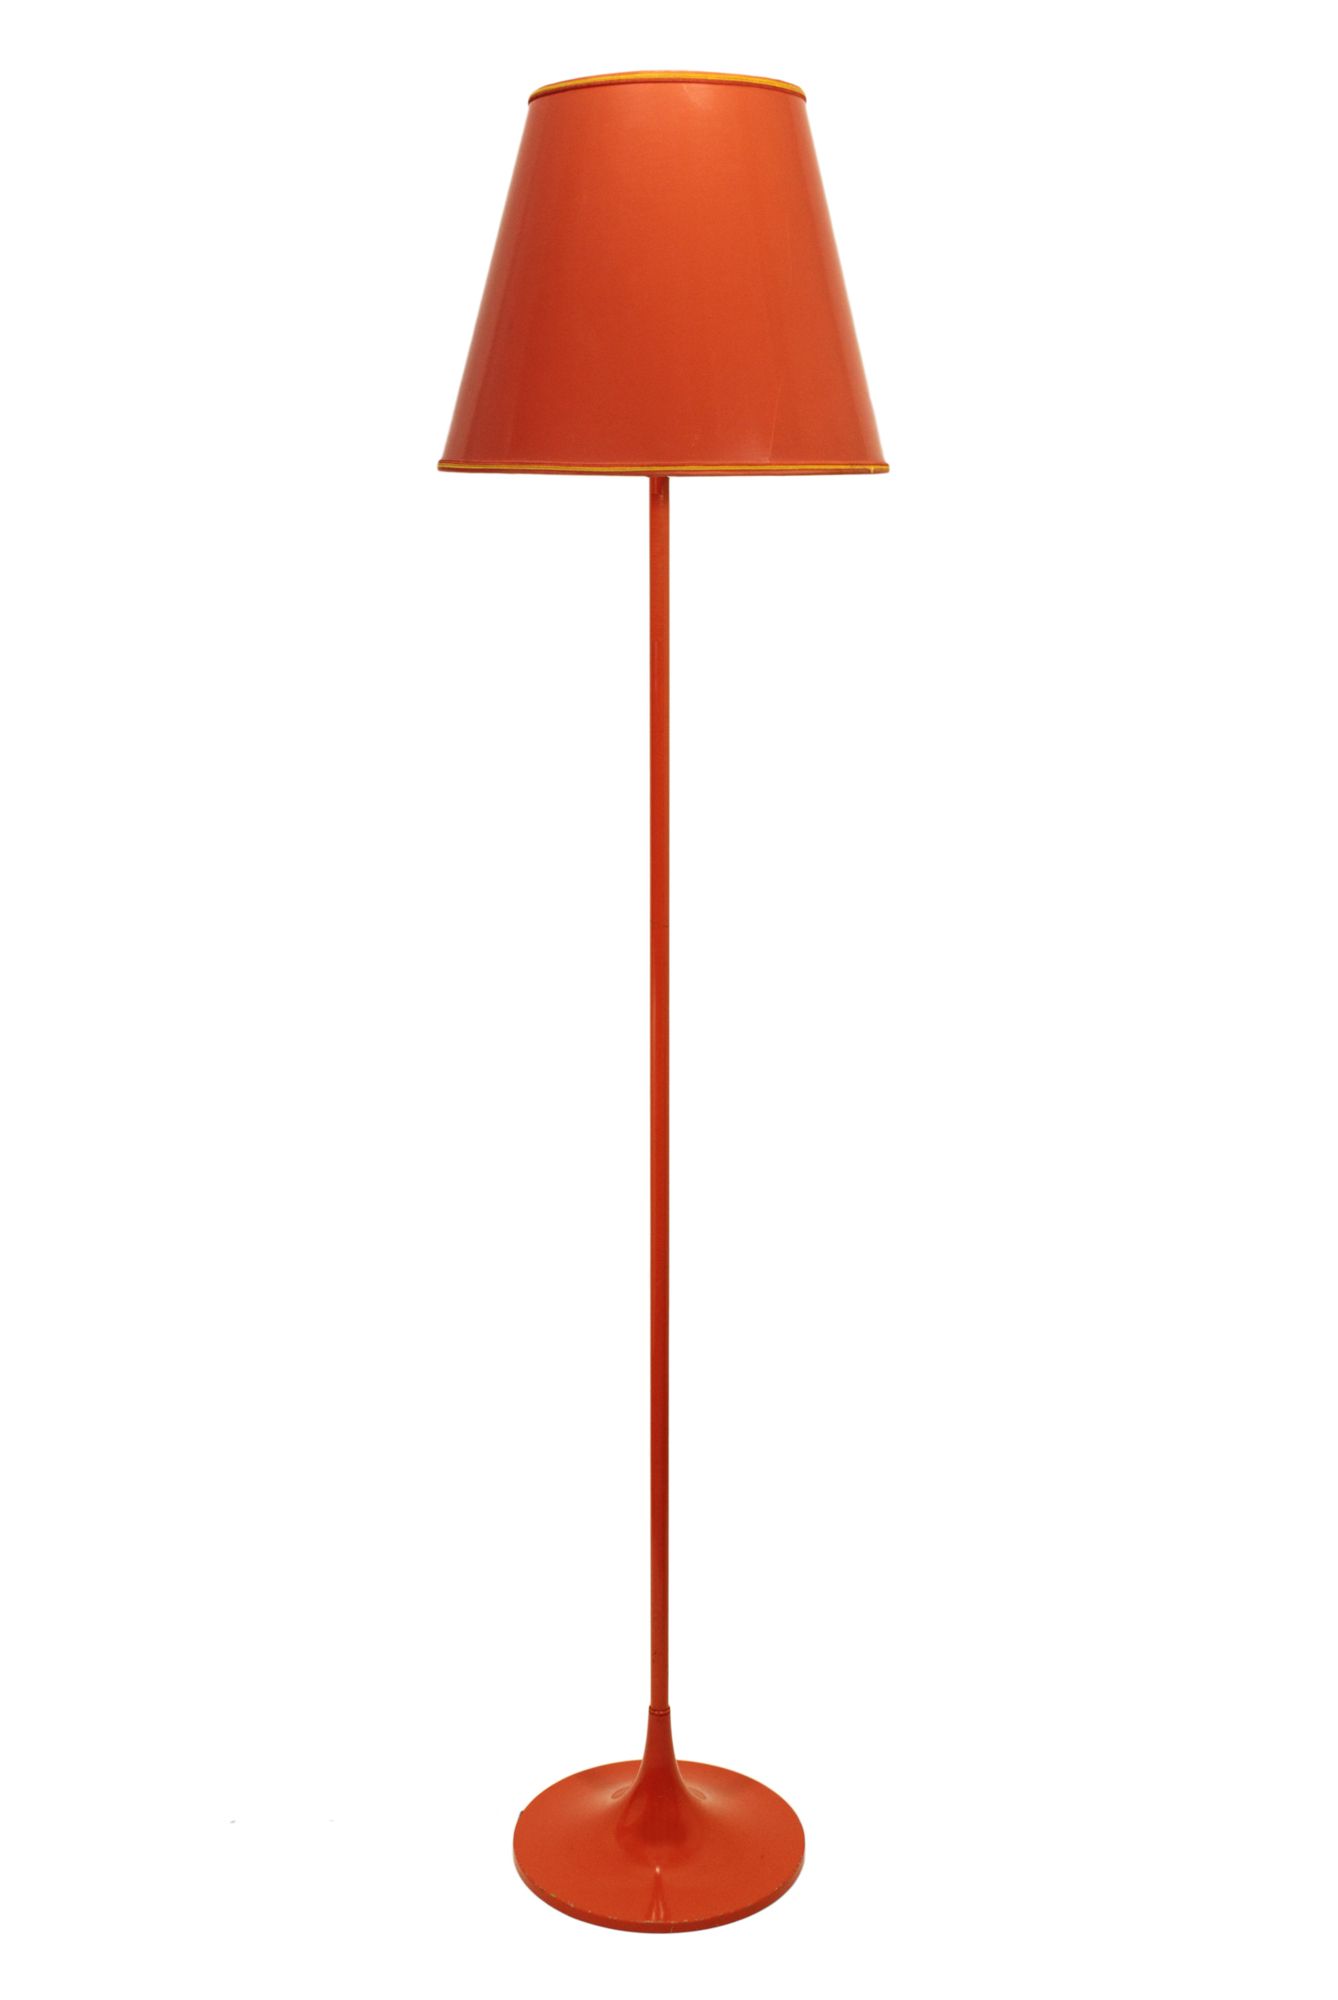 Orange Floor Lamp Hotsell, Save 57% – Aveclumiere Throughout Orange Floor Lamps (View 3 of 20)